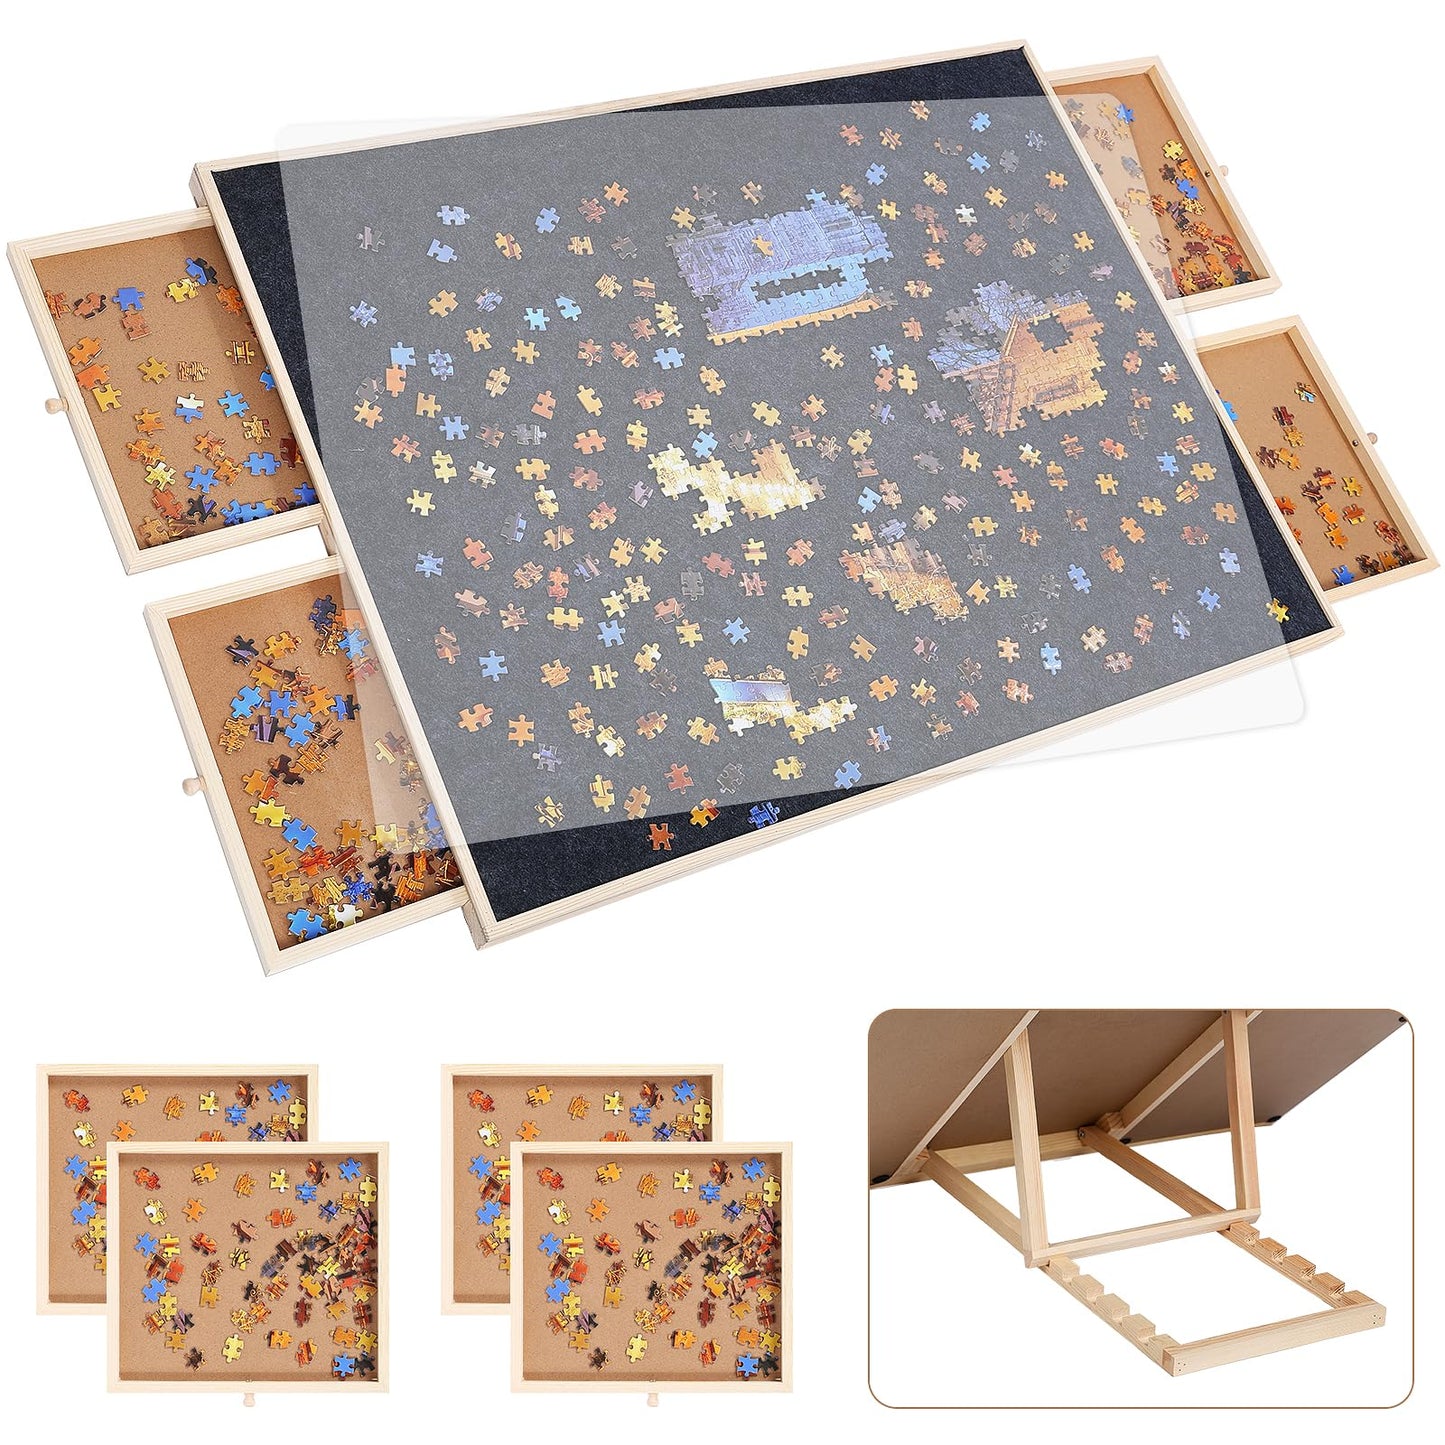 1500 Piece Wooden Jigsaw Puzzle Board with 5-Adjustable-Angle Stand 4 Large Drawers 35”X 27” Protable Puzzle Table|Felt Surface and Translucent Cover Mat,Portable Puzzle Tables for Adults and Kids